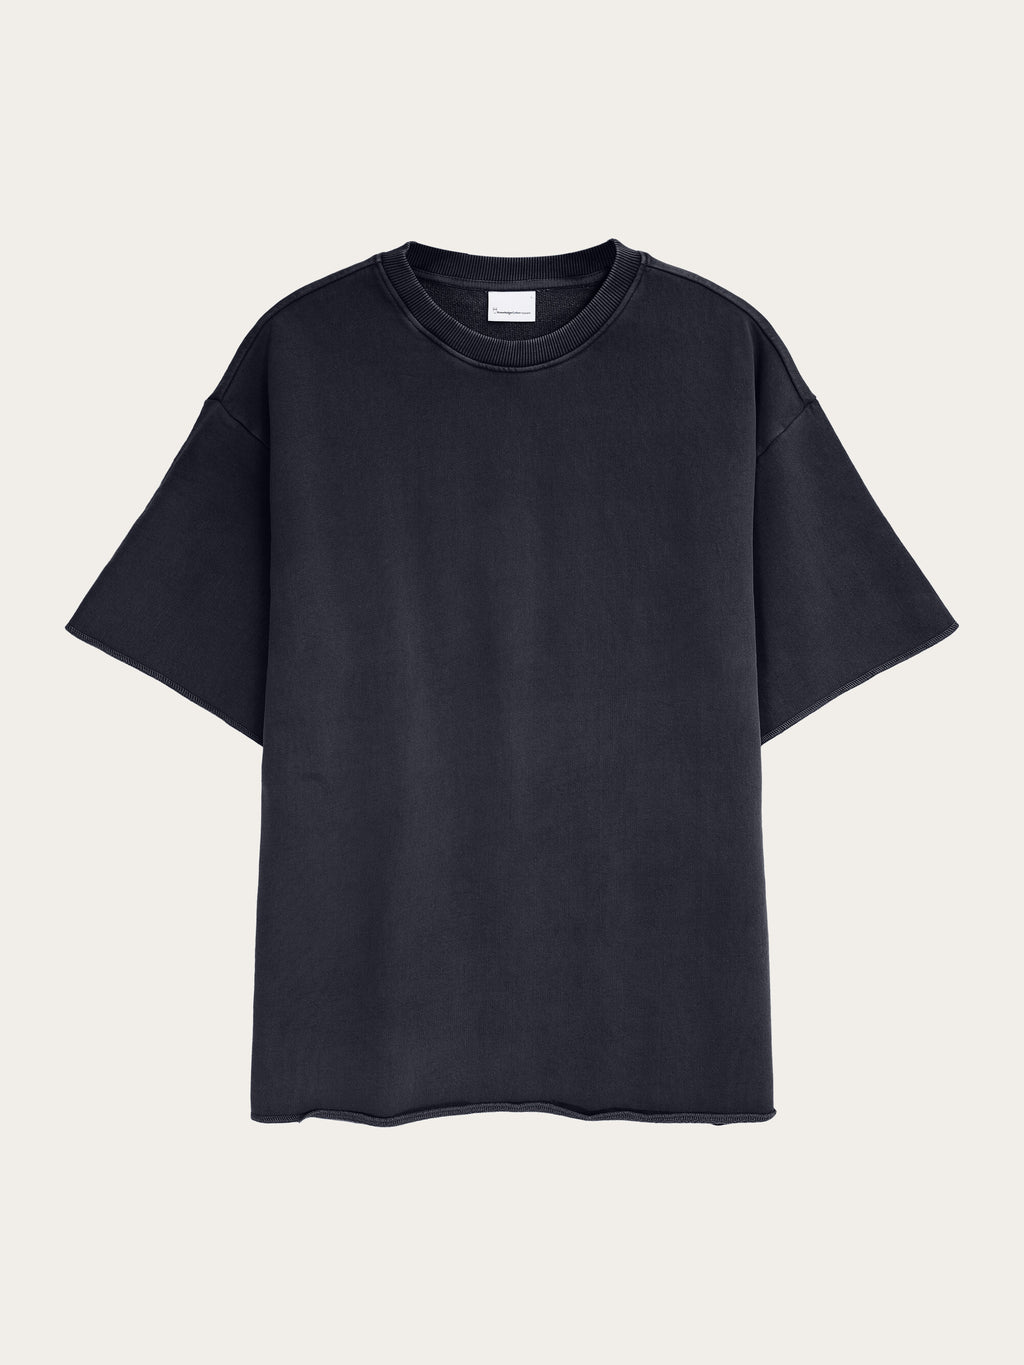 Buy Loose fit reactive dyed sweat t-shirt - GOTS/Vegan - Black Jet - from KnowledgeCotton  Apparel®